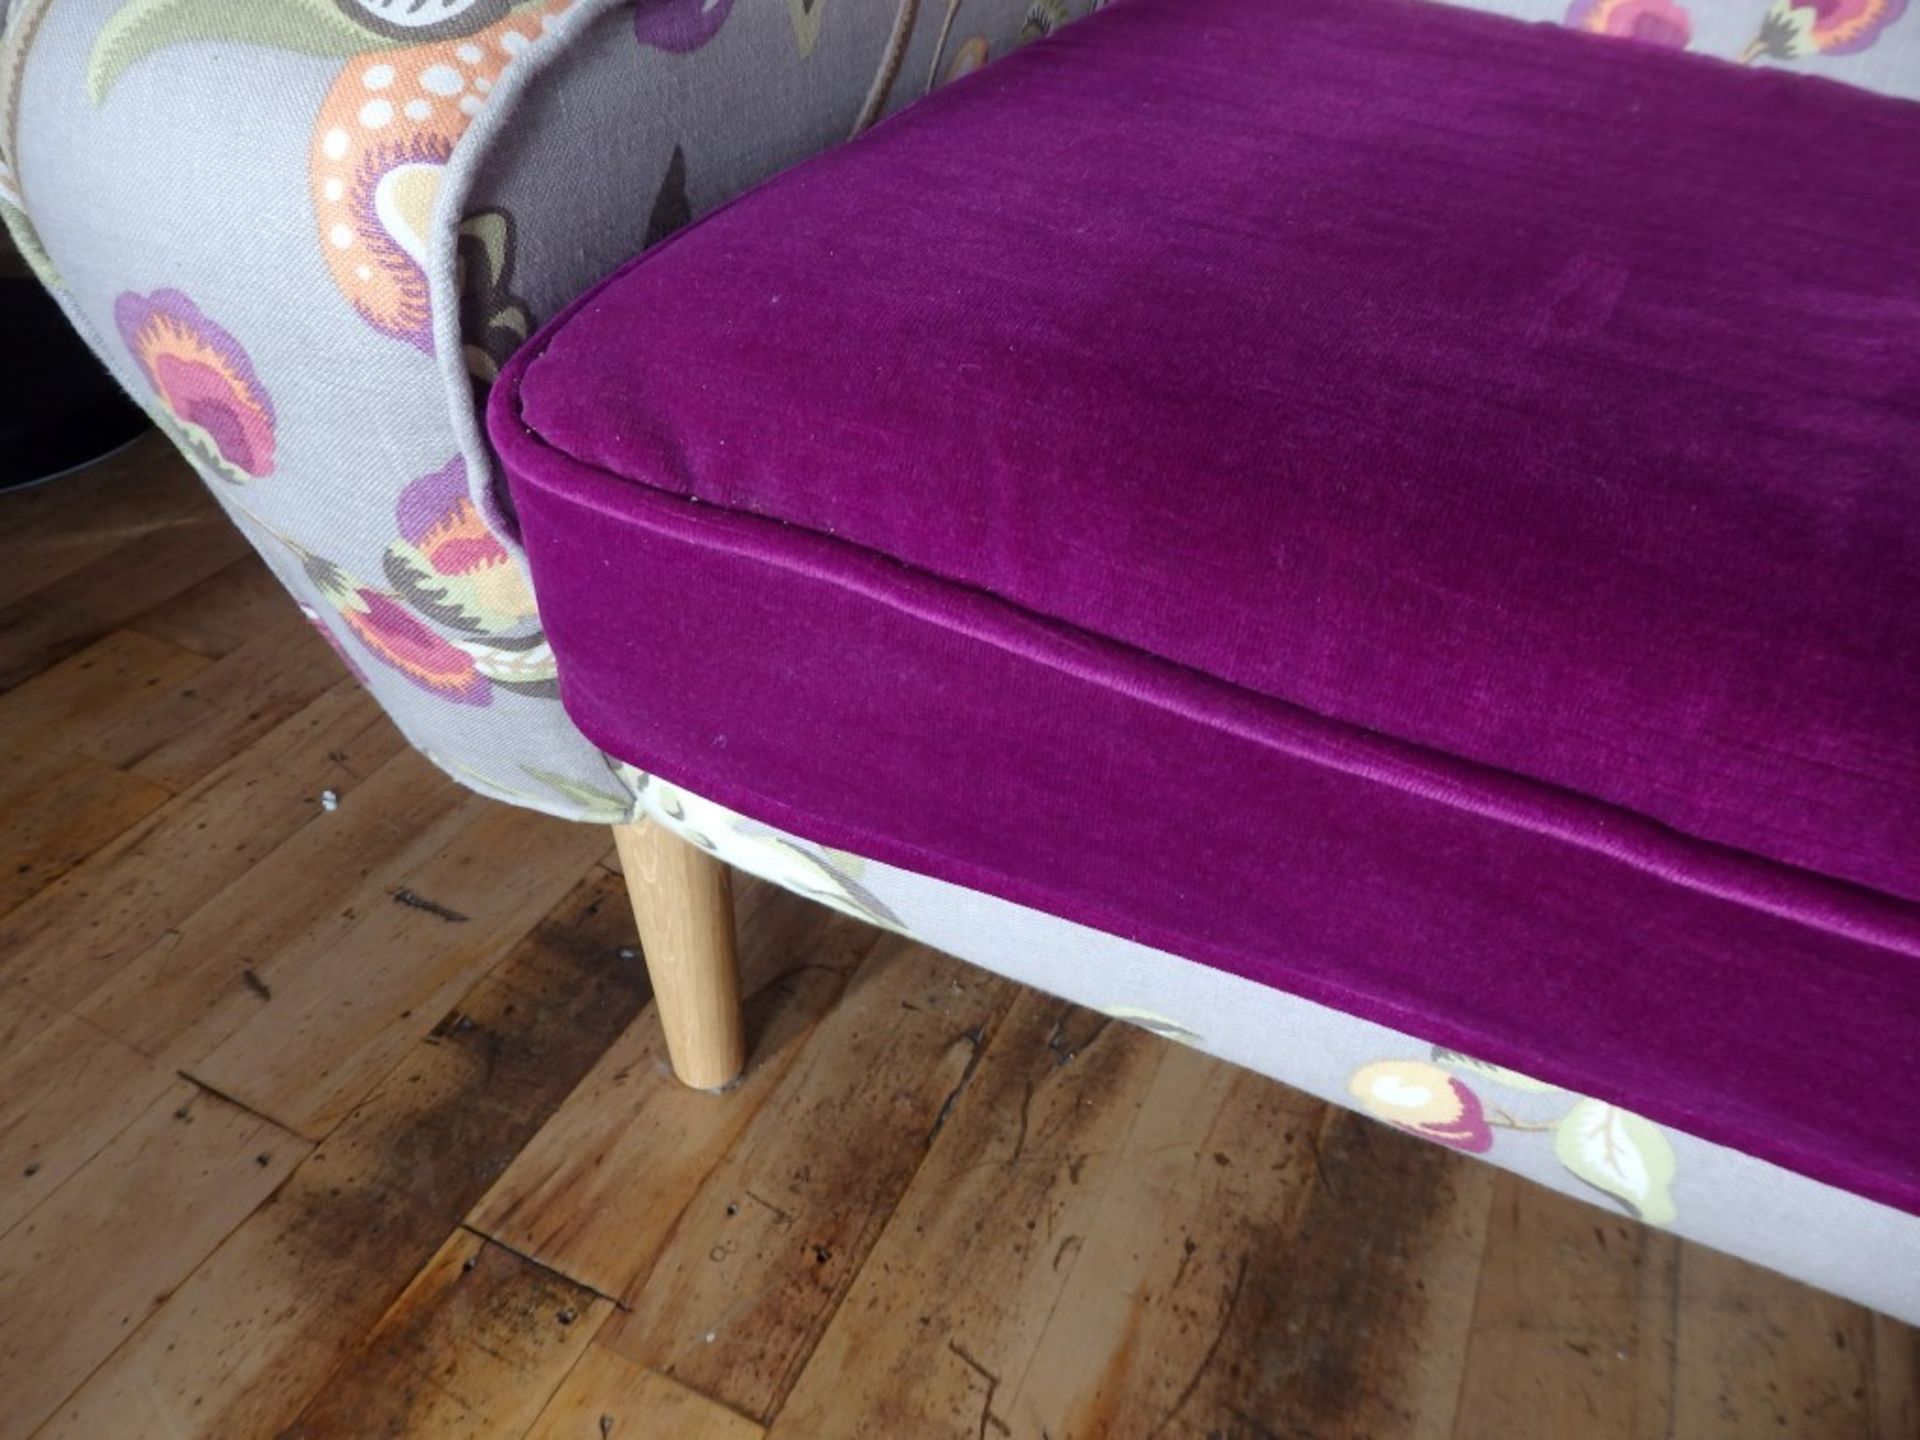 1 x Bespoke Handcrafted Sofa - British Made - Dimensions: L195 x H80 x D80cm - Ref: DB024 - - Image 3 of 5